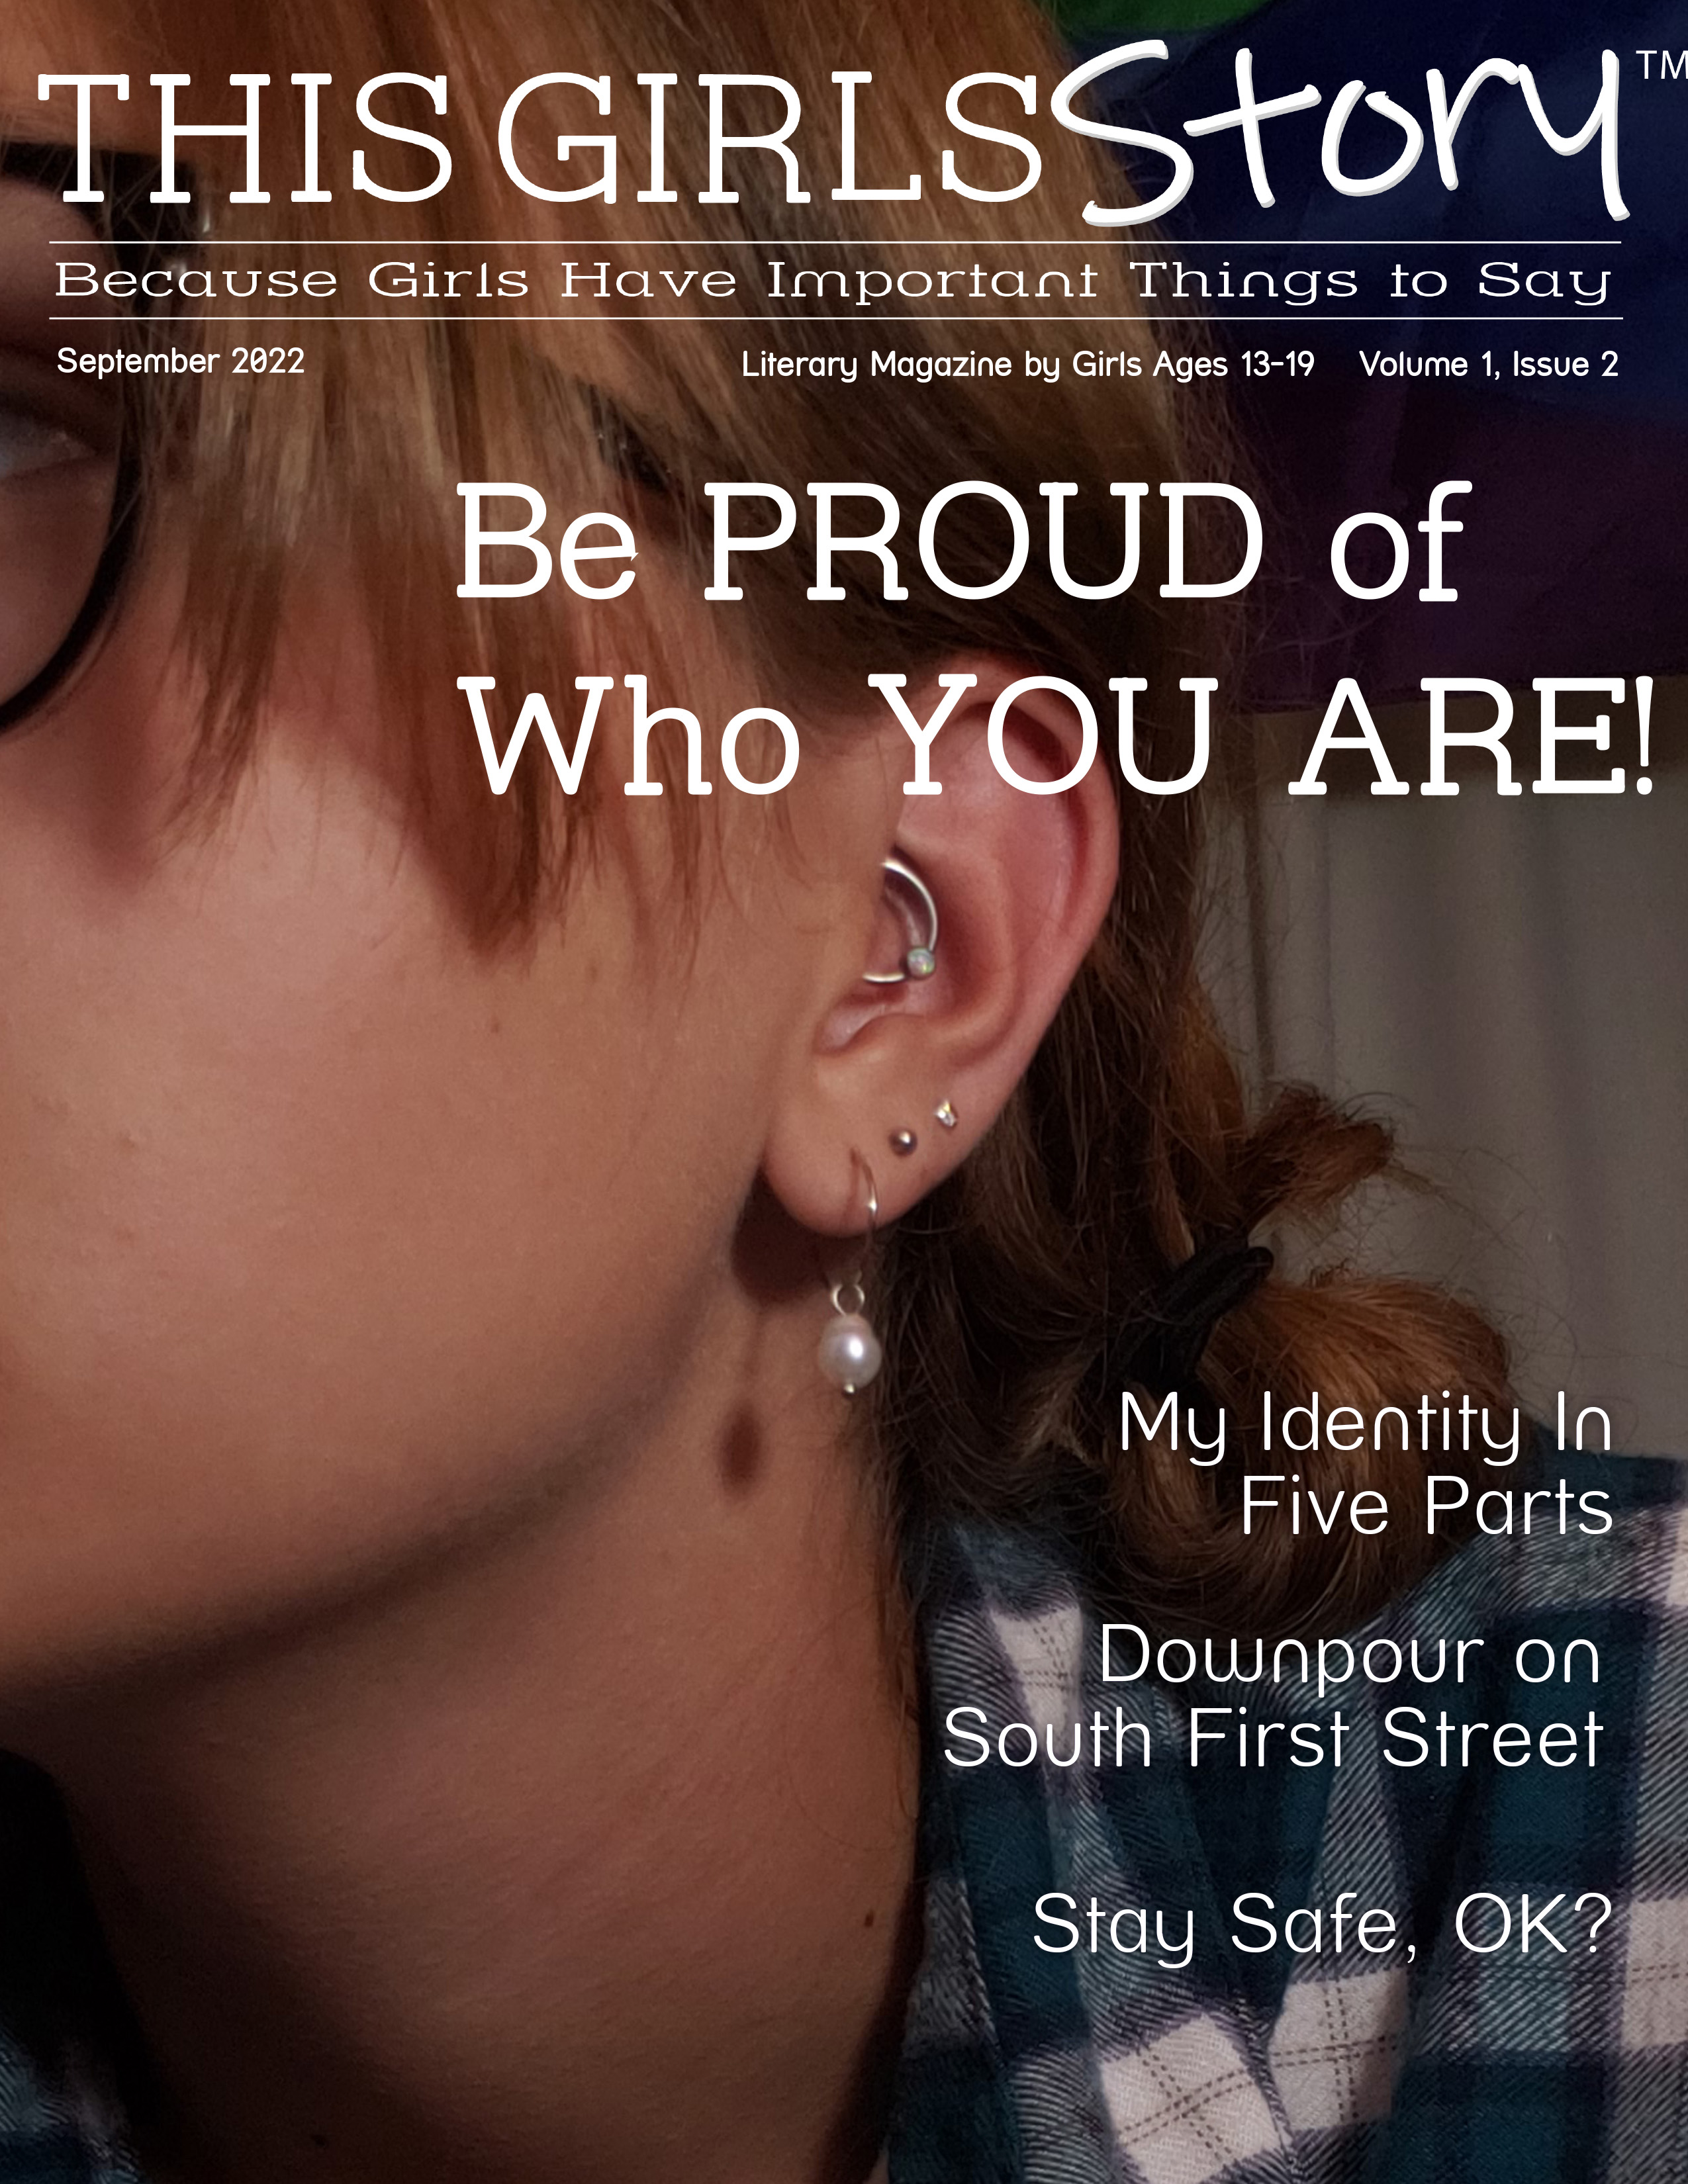 This TGS Digital Magazine Fall 2022 Issue: Be PROUD of Who YOU ARE! is made with love by This Girls Story! Shop more unique gift ideas today with Spots Initiatives, the best way to support creators.